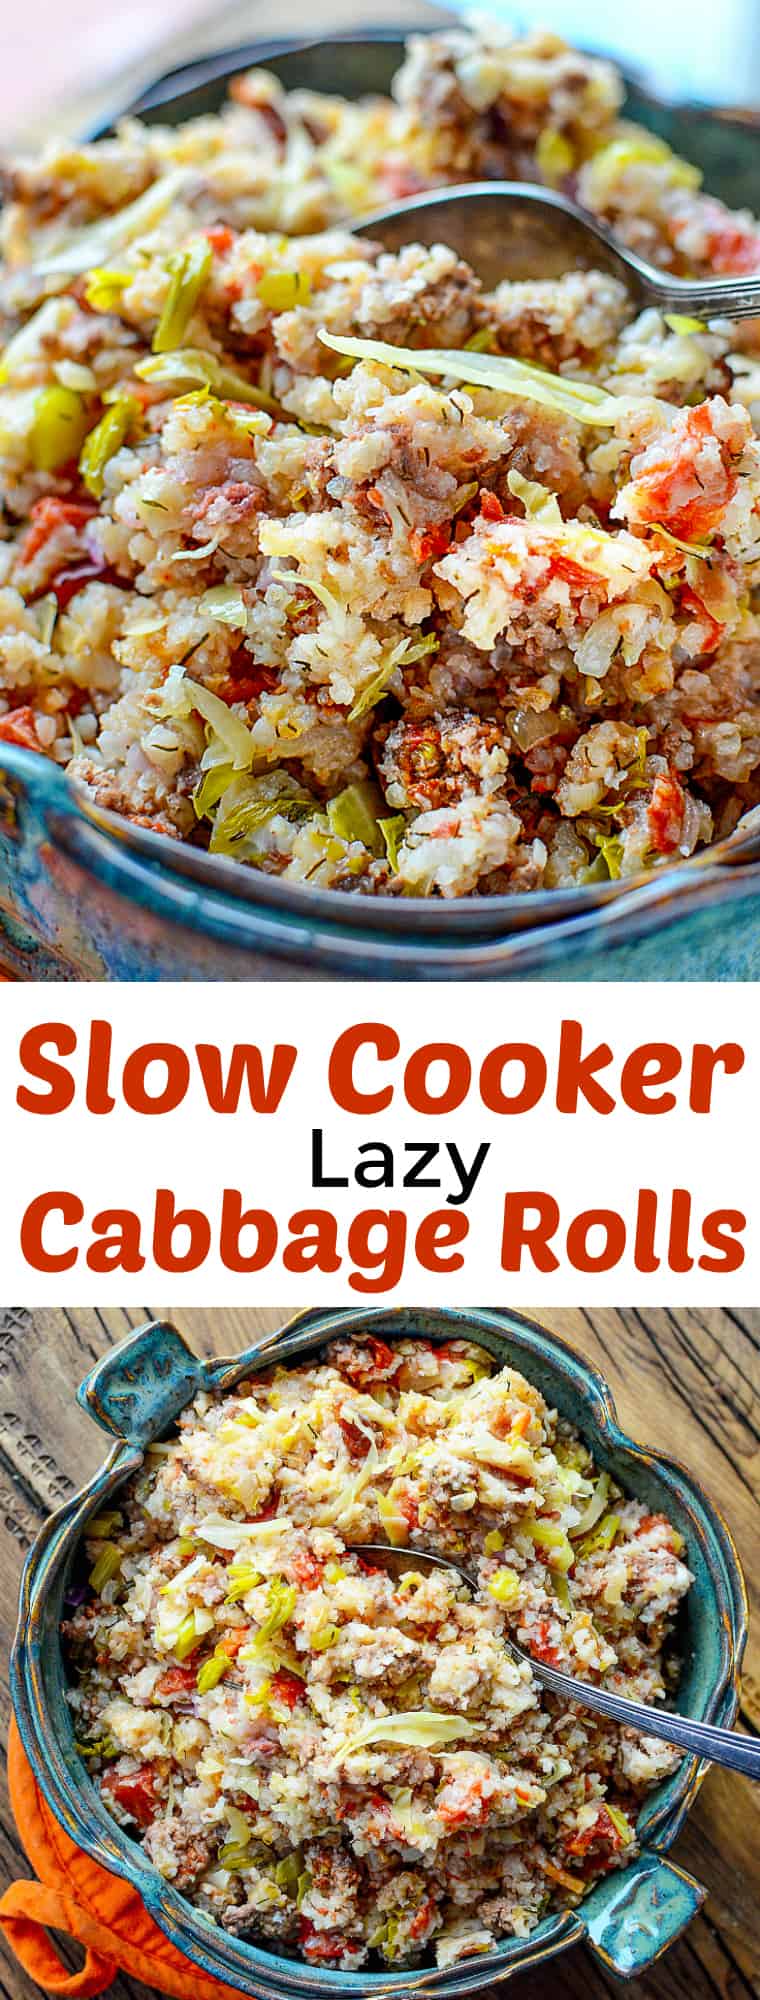 slow-cooker-lazy-cabbbage-rolls-recipe